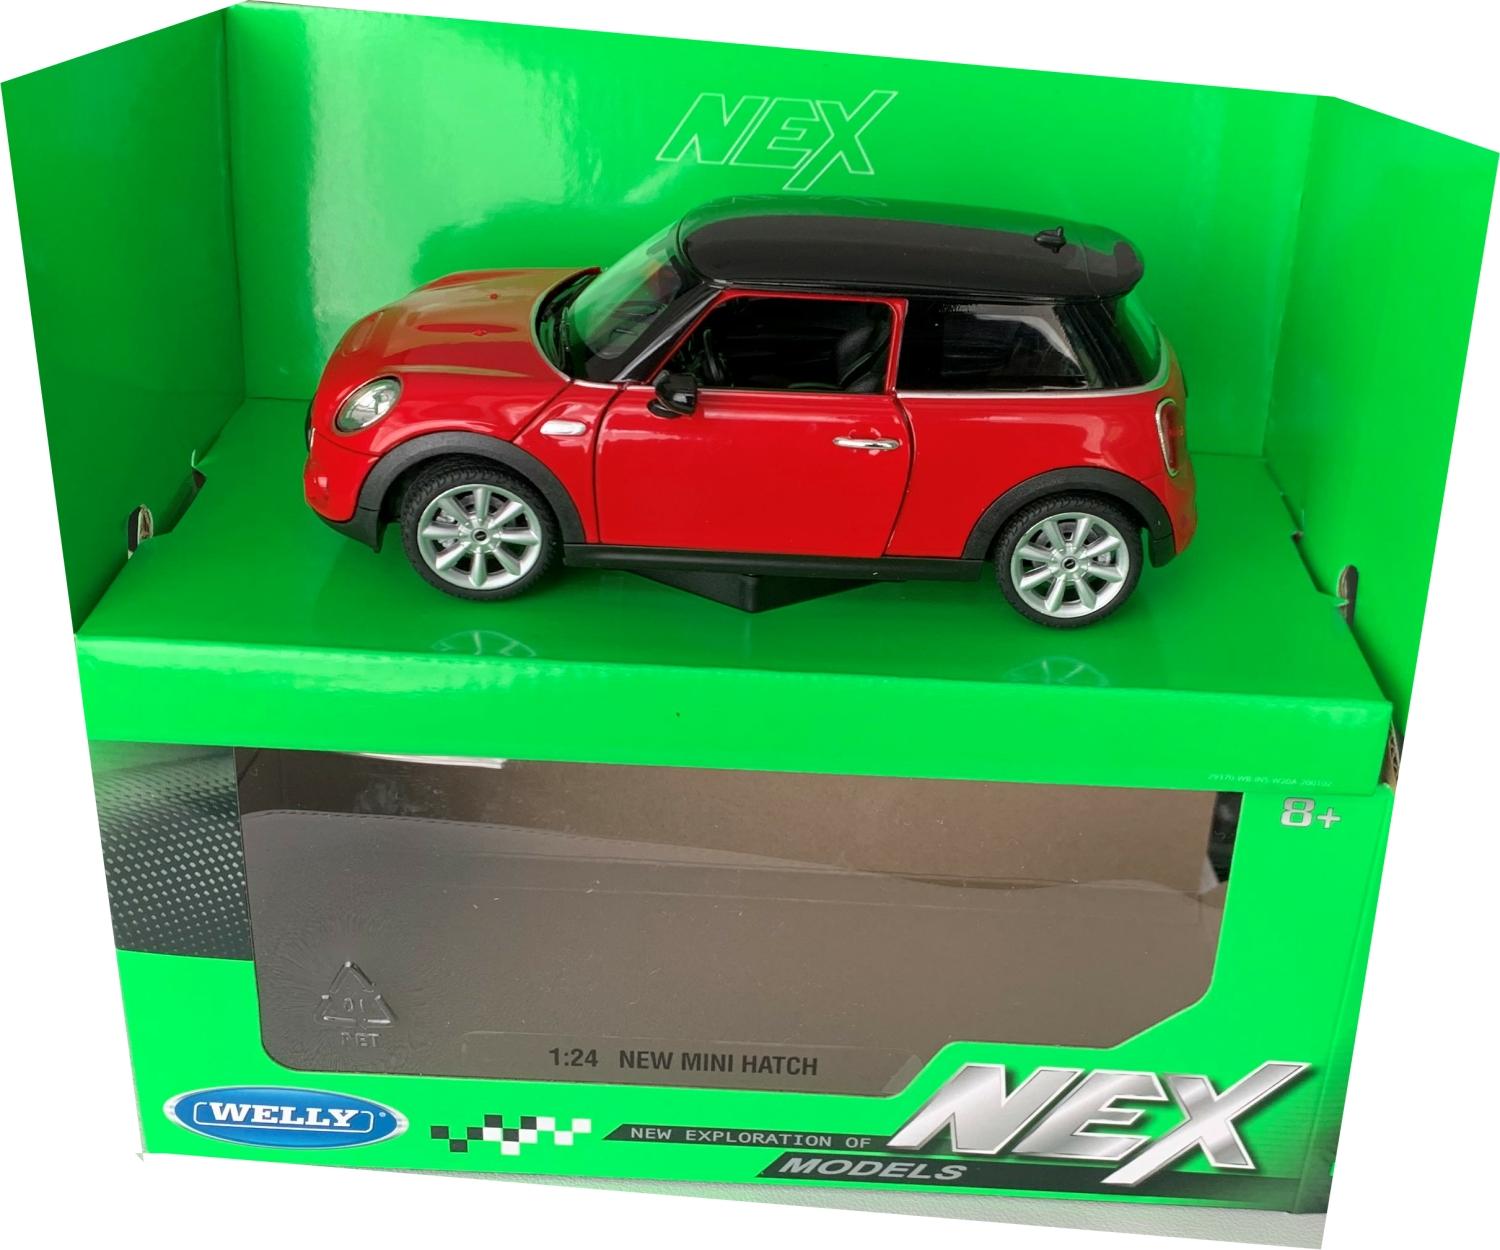 An excellent scale model of a Mini Cooper S Hatch decorated in red with black roof, roof top spoiler and silver wheels. The model is presented in a window display box, the car is approx. 16 cm long and the presentation box is 23 cm long.